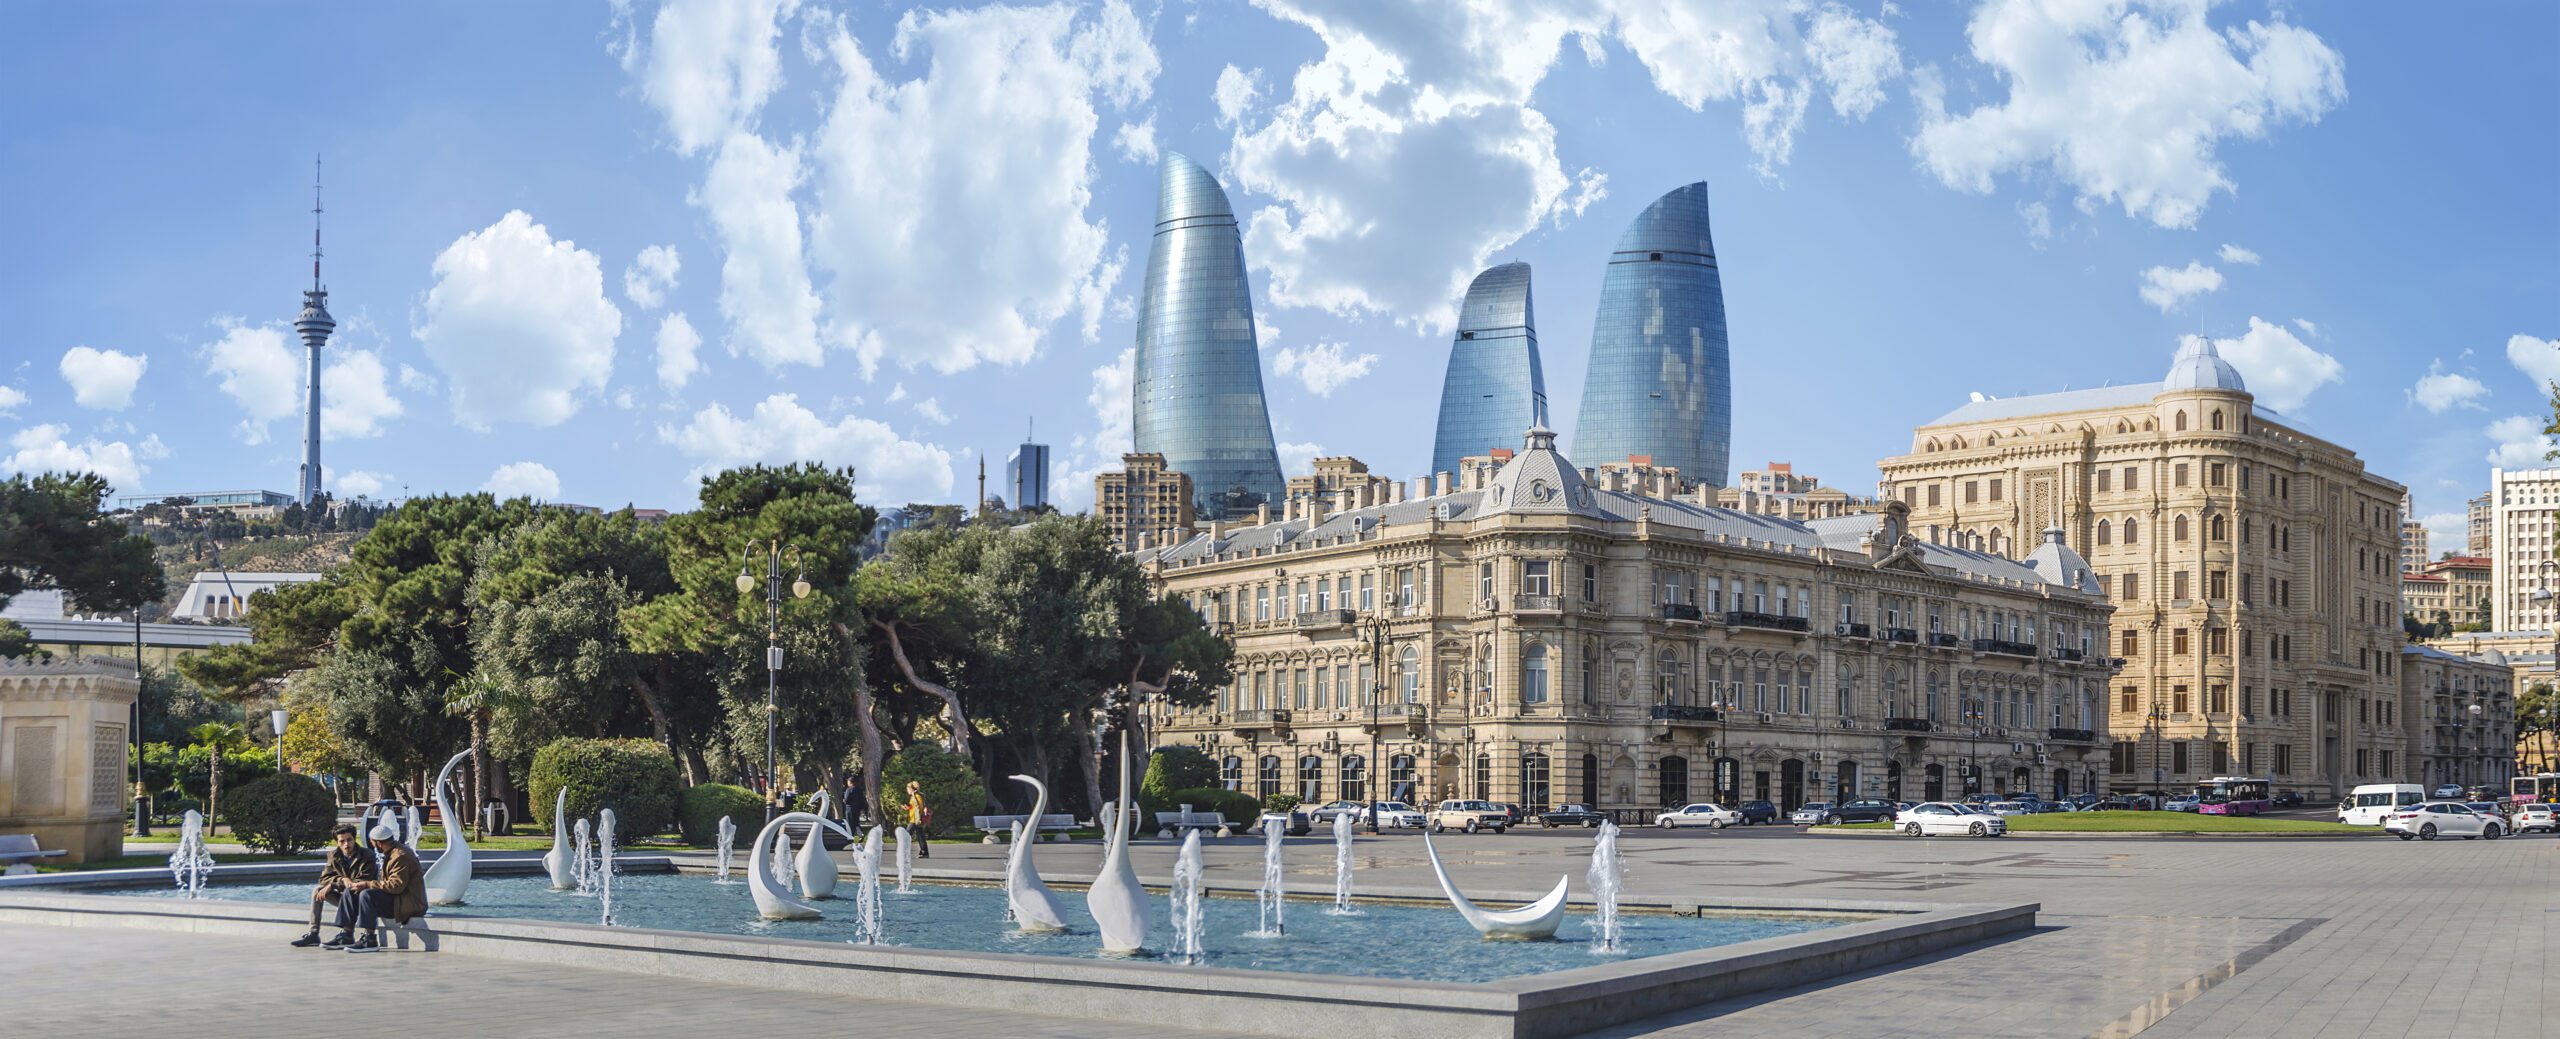 Baku, Azerbaijan September 16, 2019: Panoramic view of the city of Baku and the image of the Flame Towers photographed from the Baku embankment on the coast of the Caspian Sea